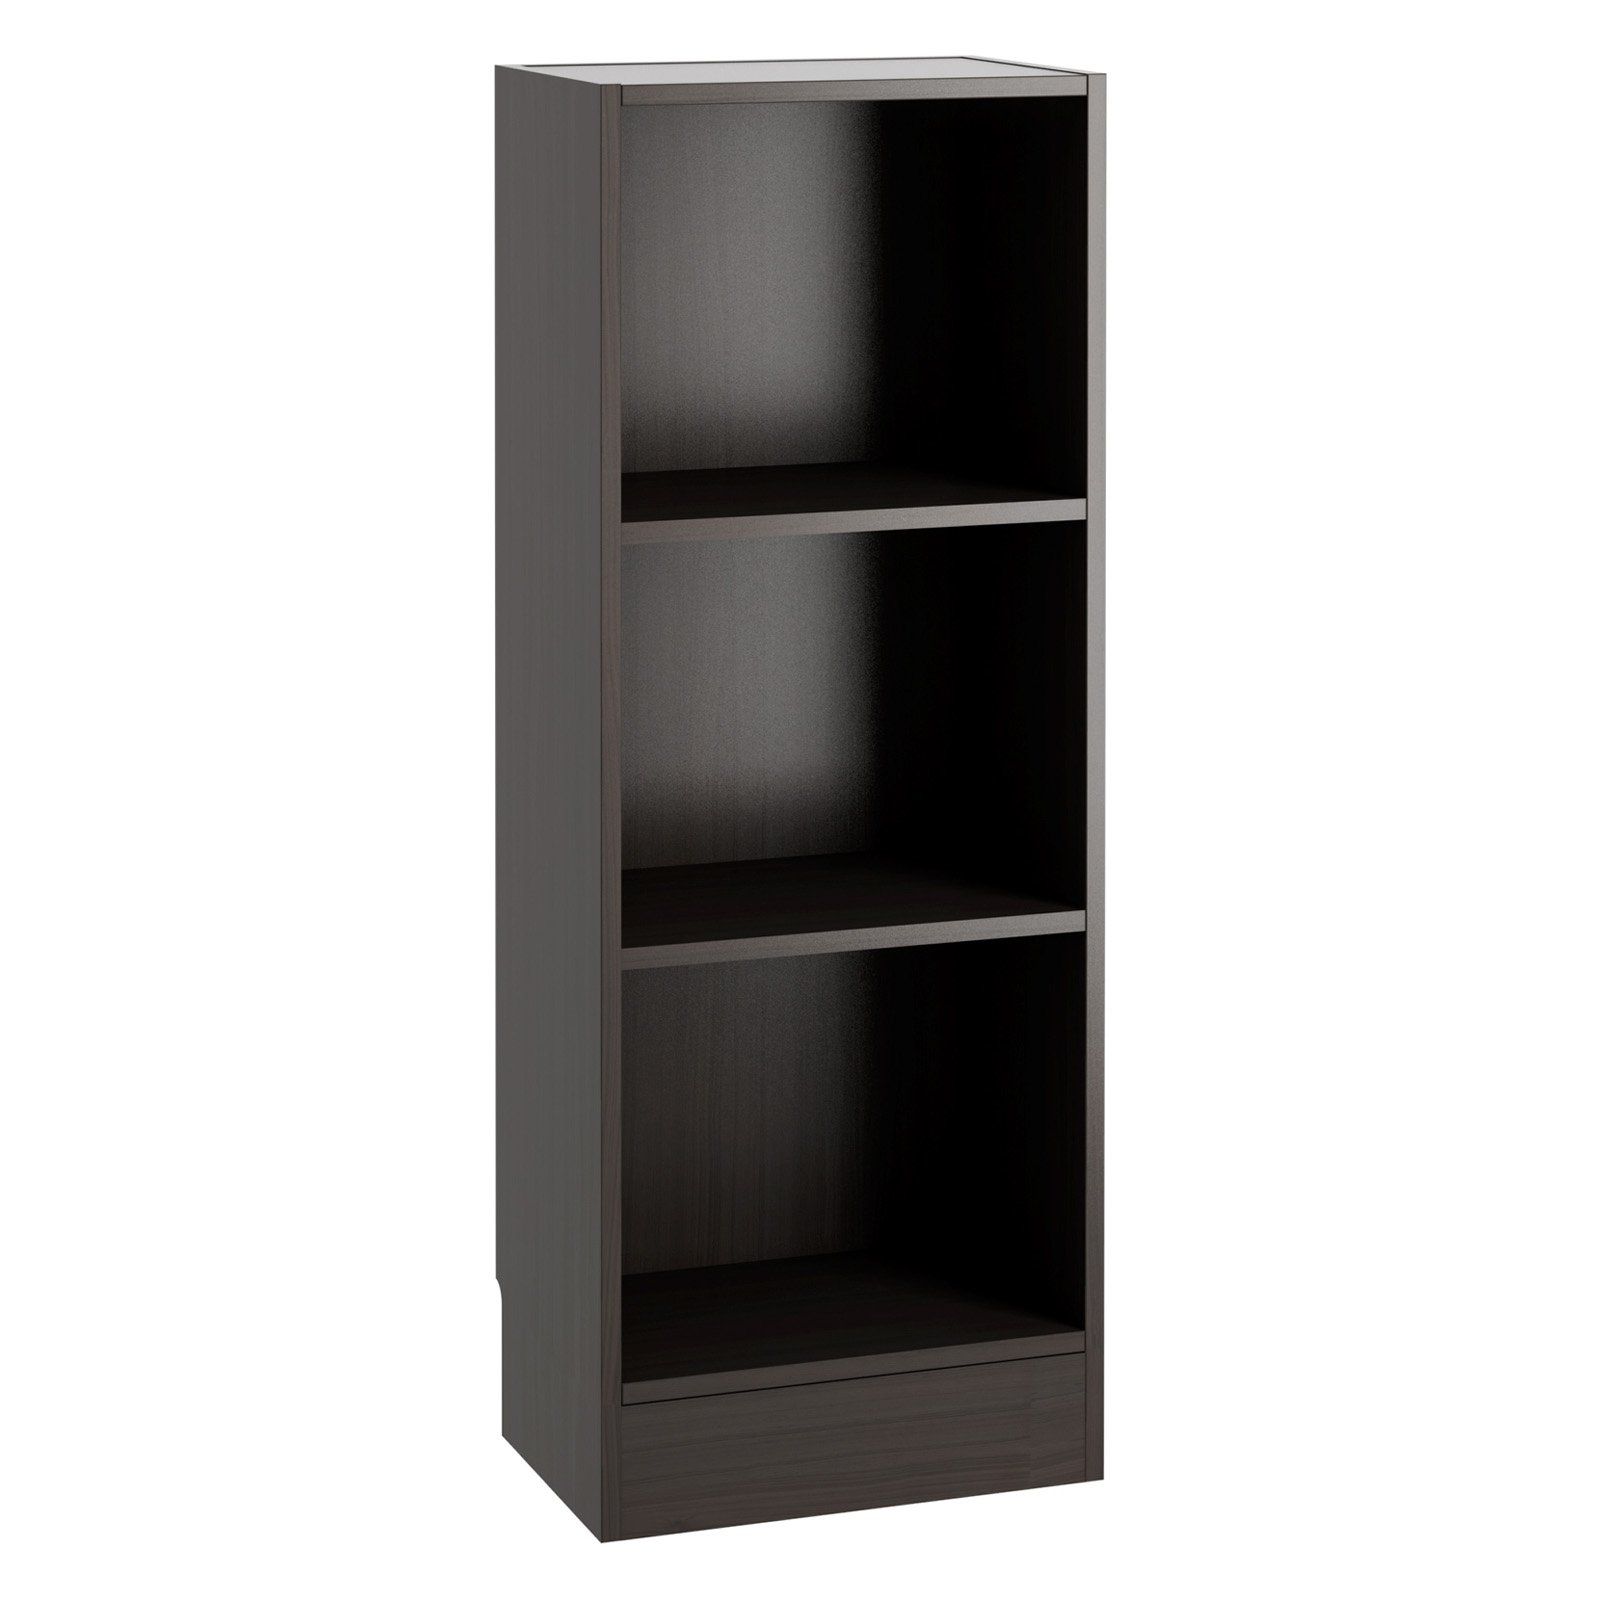 Short Narrow Bookcases Pertaining To Current Element Short Narrow 3 Shelf Bookcase – Walmart (View 2 of 15)